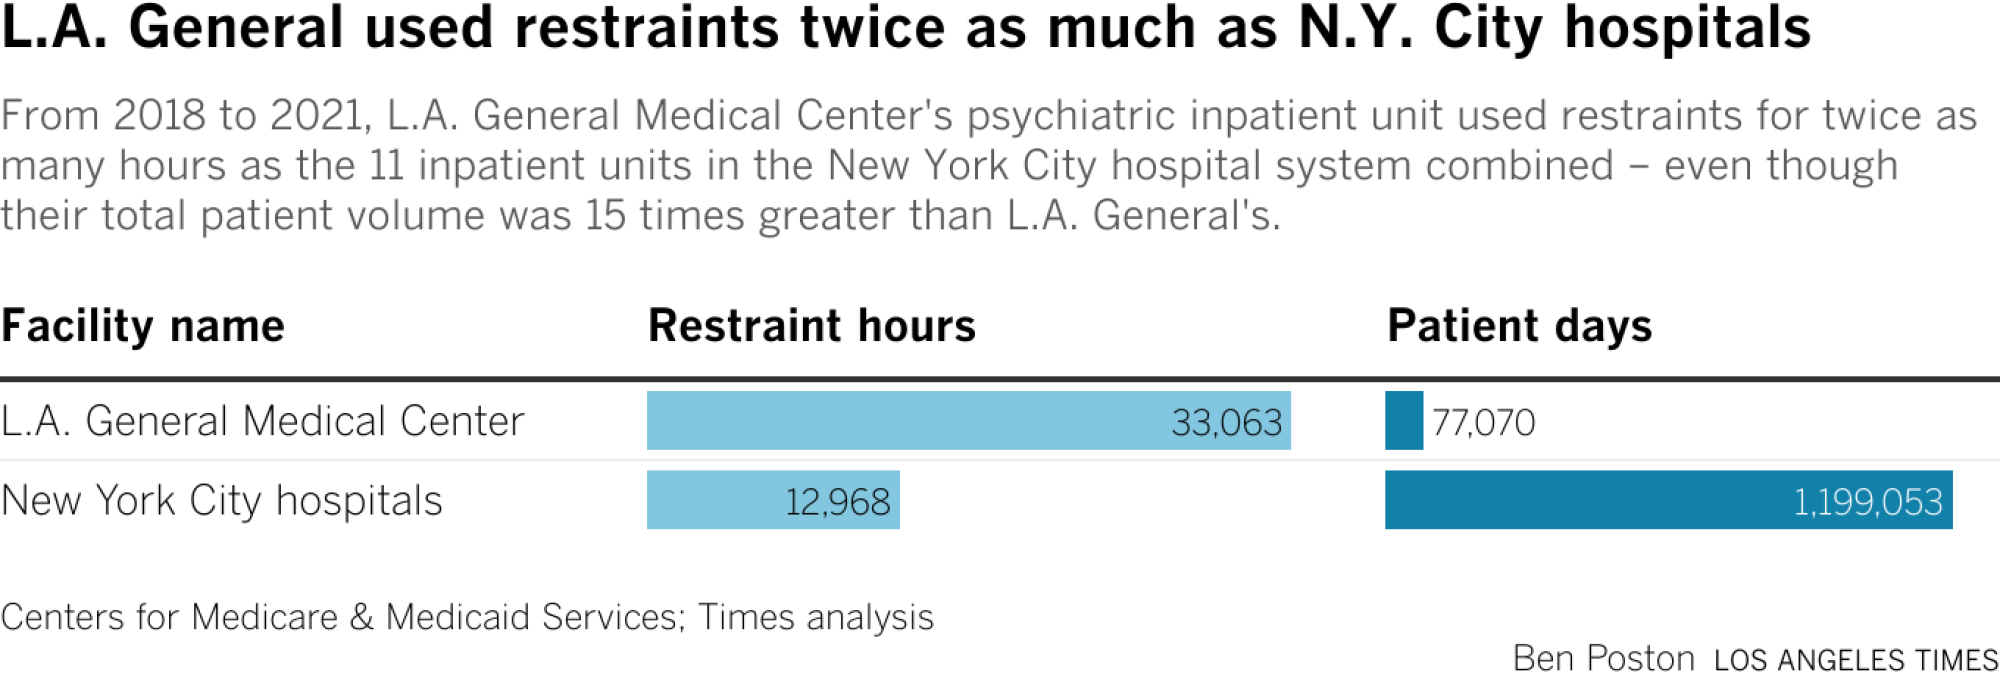 From 2018 to 2021, L.A. General Medical Center's psychiatric inpatient unit used restraints for twice as many hours as the 11 inpatient units in the New York City hospital system combined – even though their total patient volume was 15 times greater than L.A. General's.